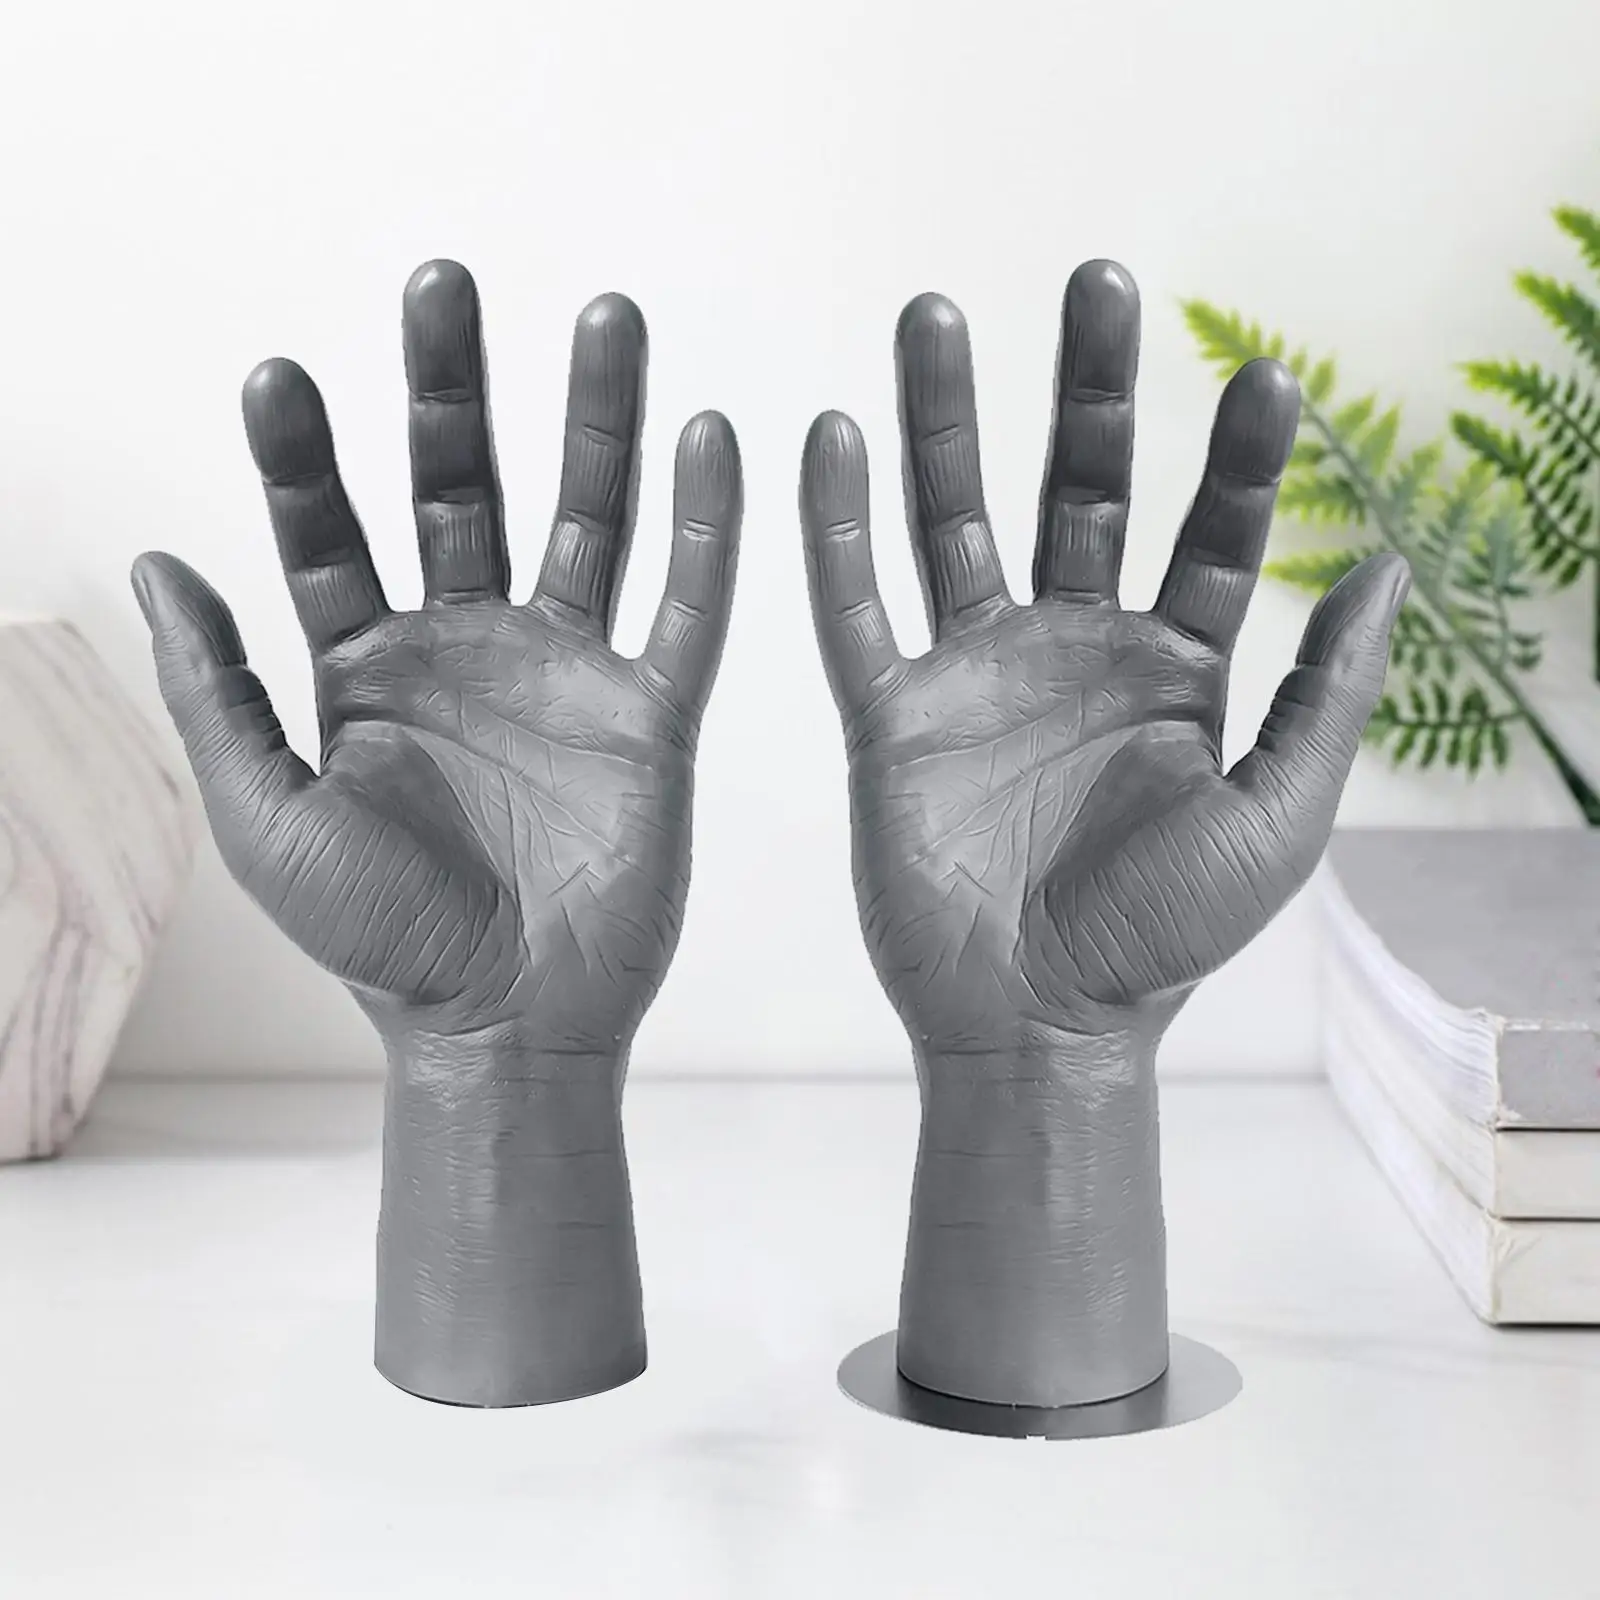 PVC Male  `s Hand Displays Bracelet  Stand Holder Showing for Home Decor Gray